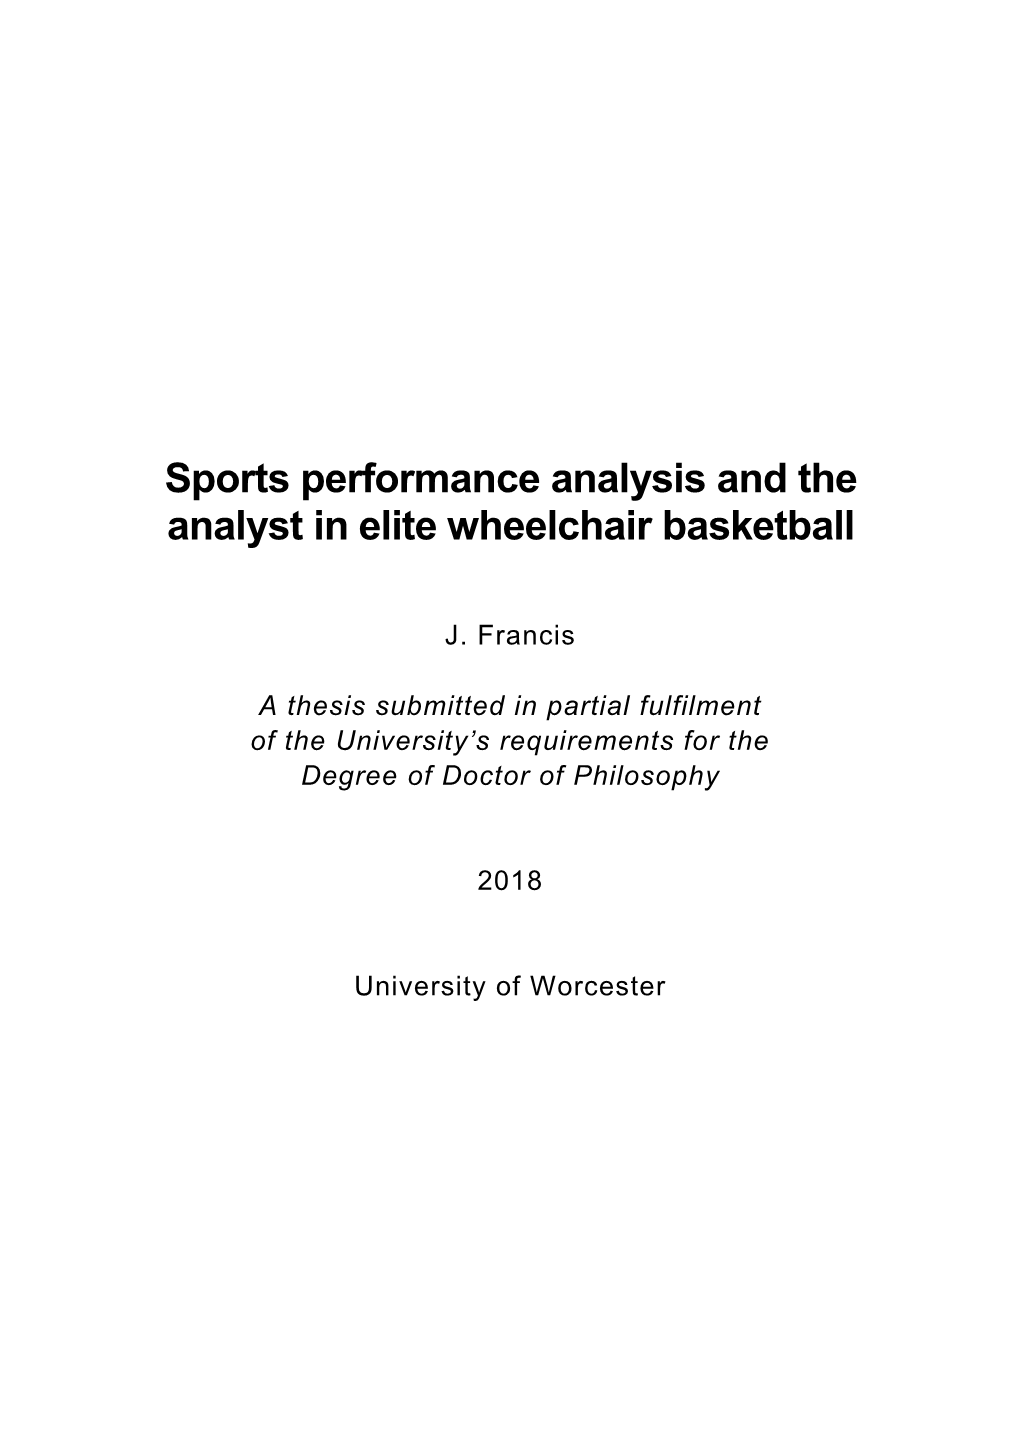 Sports Performance Analysis and the Analyst in Elite Wheelchair Basketball